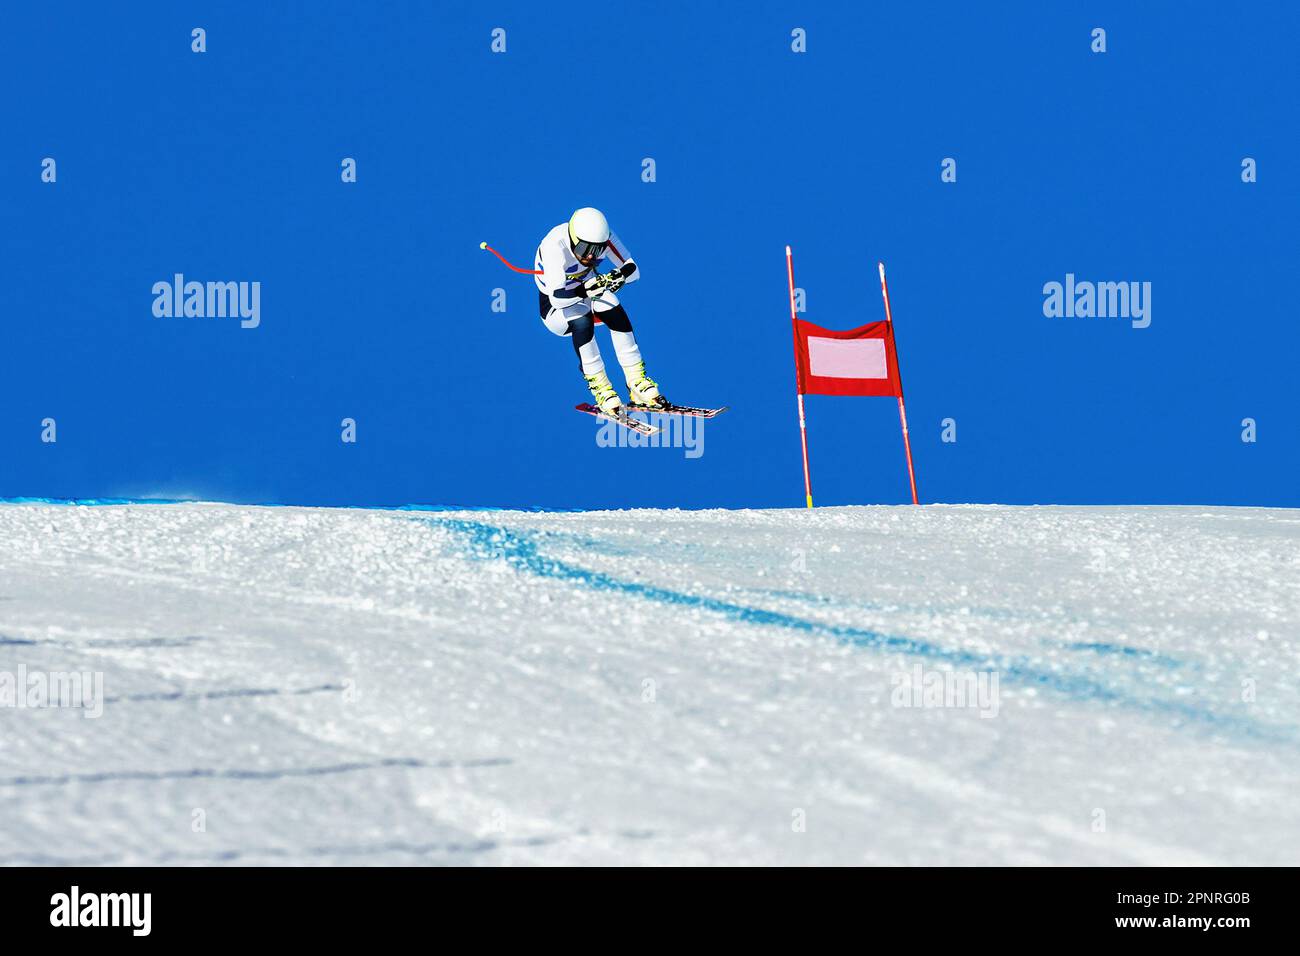 male ski racer on alpine skiing track downhill race, jump and flying on hill Stock Photo